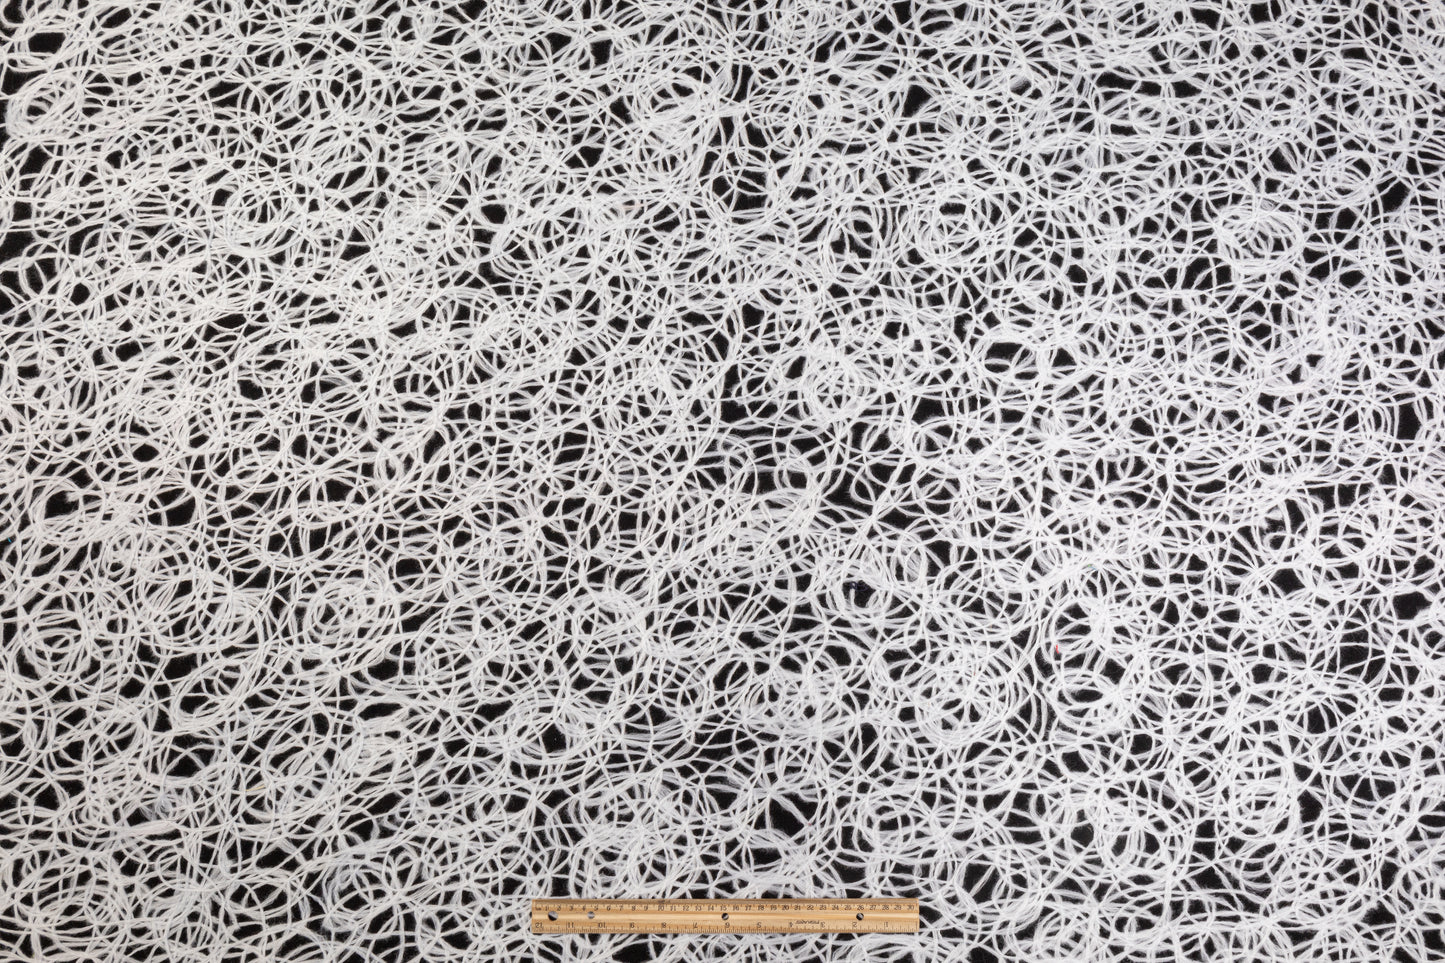 Embroidered Poly Rayon Wool Coating - Black/White